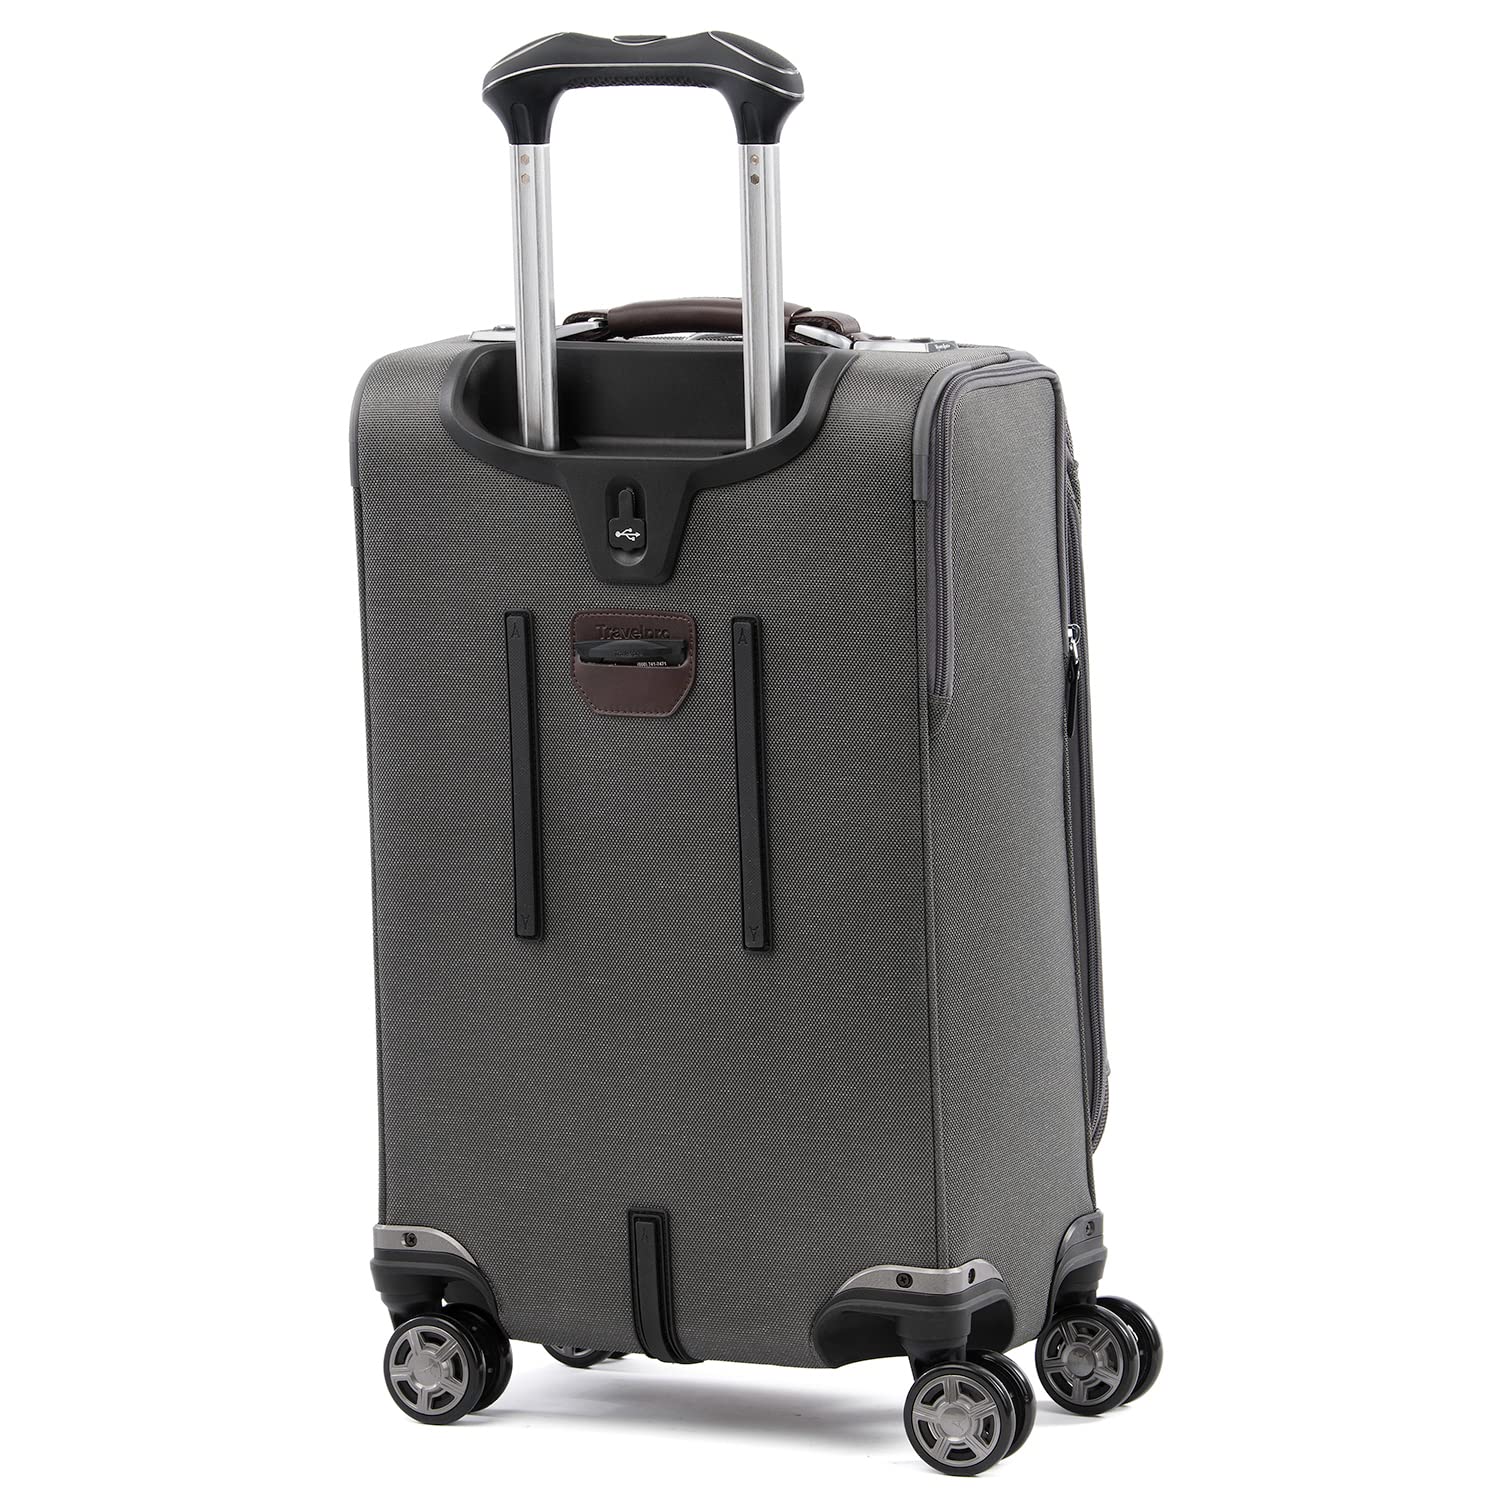 Travelpro Platinum Elite Softside Expandable Carry on Luggage, 8 Wheel Spinner Suitcase, USB Port, Suiter, Men and Women, Vintage Grey, Carry On 21-Inch